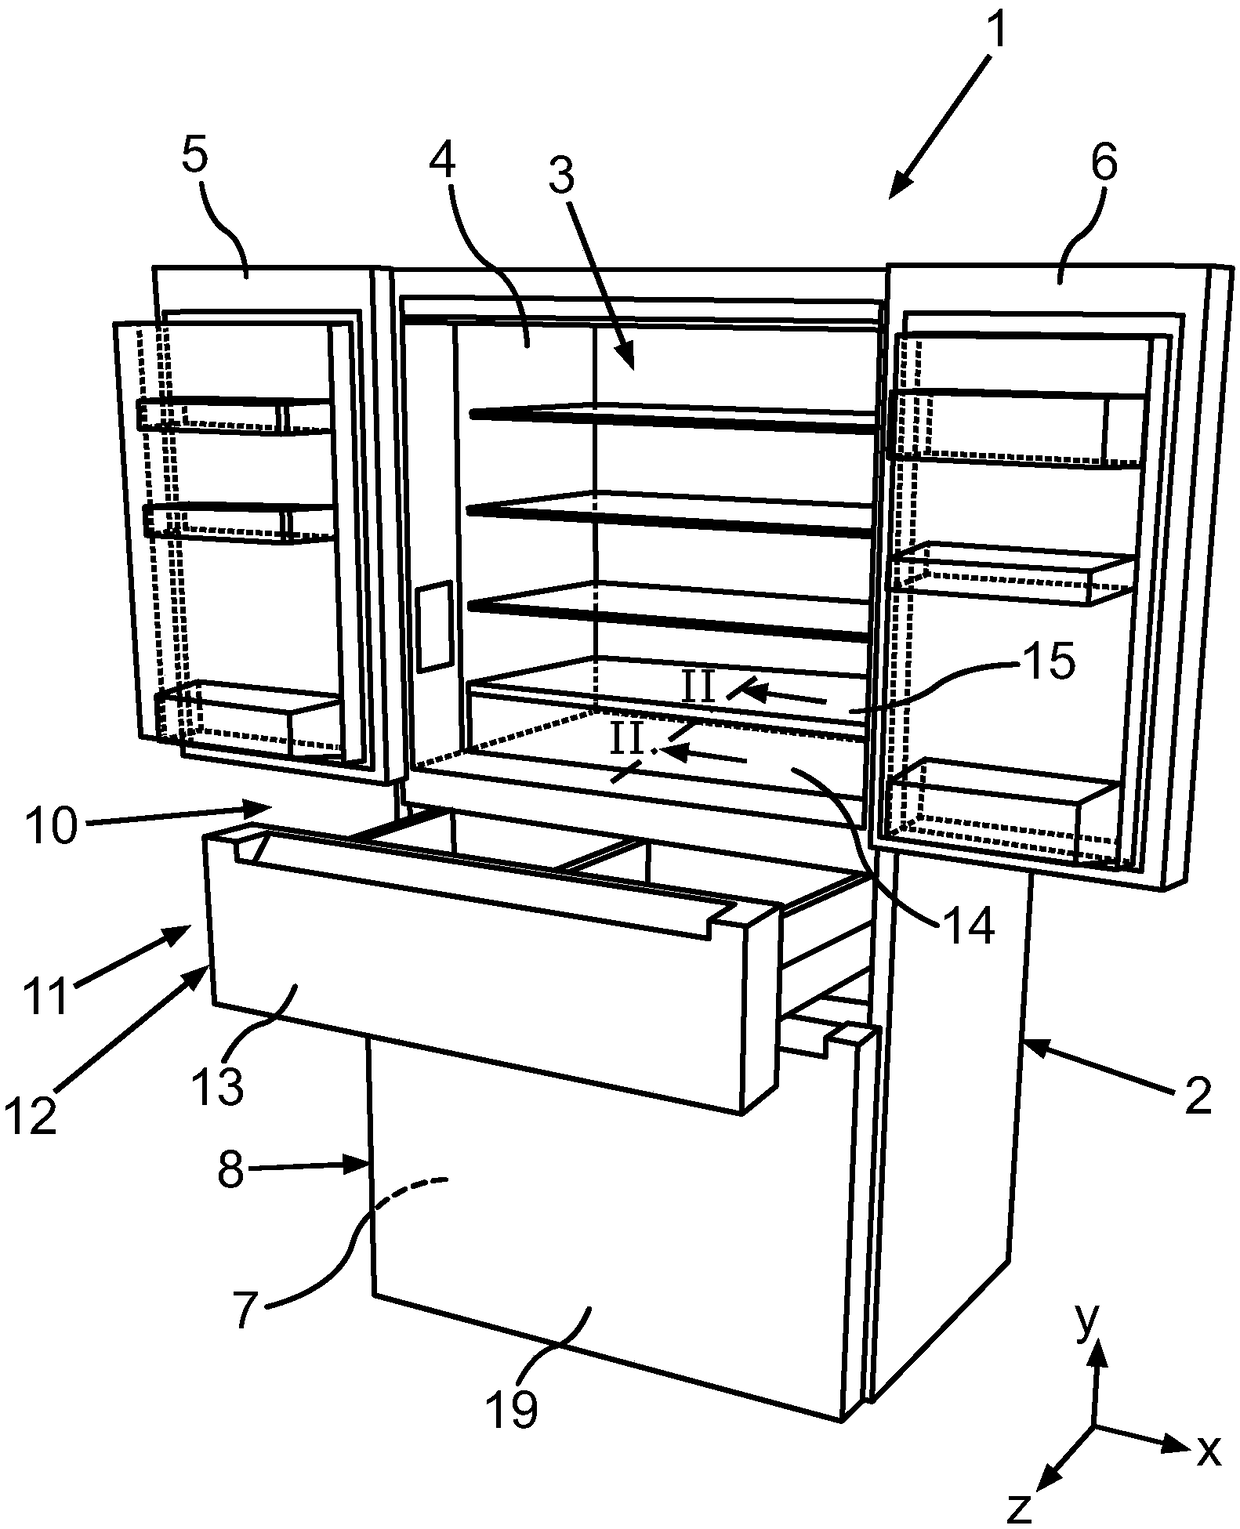 Domestic refrigeration appliance with specific front-side lowering segment of a compartment floor